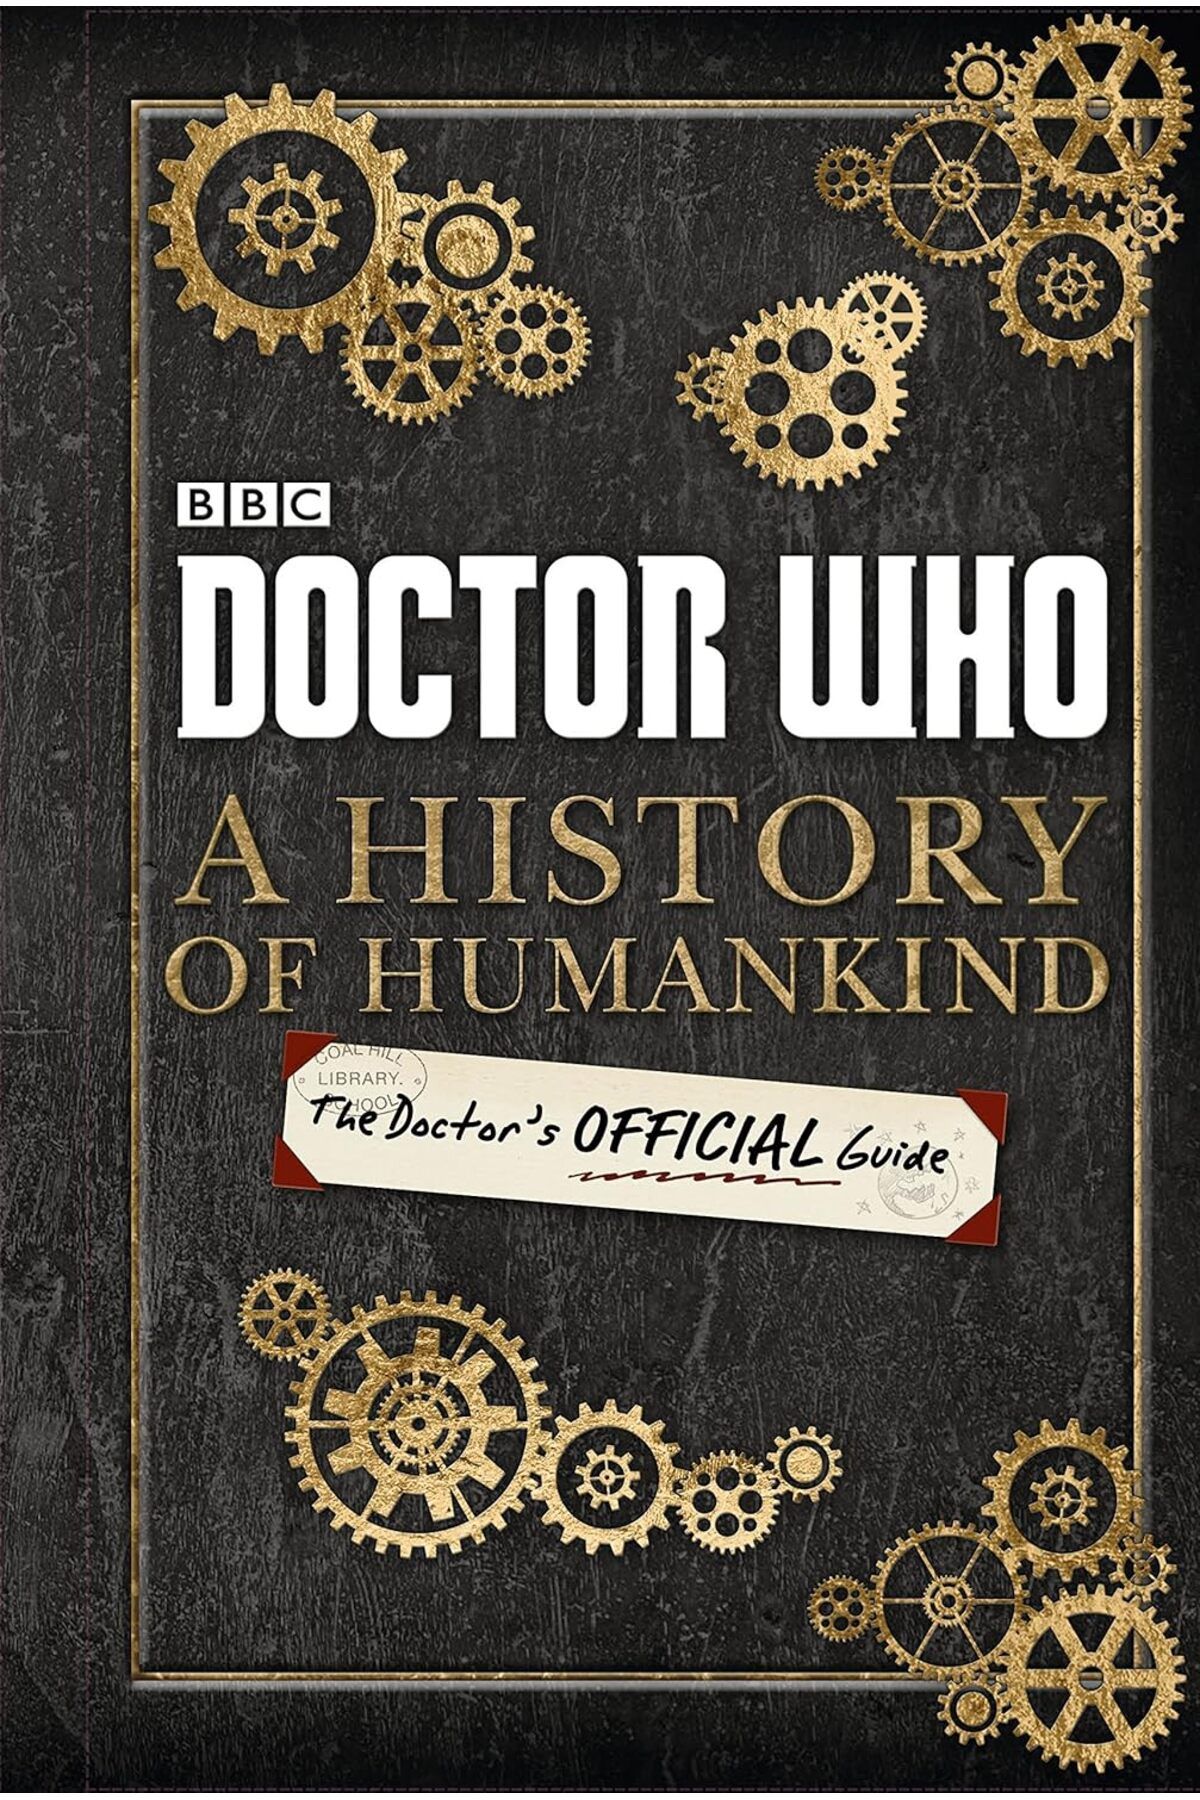 Fecr Yayınevi Doctor Who: A History Of Humankind: The Doctor's Offical Guide